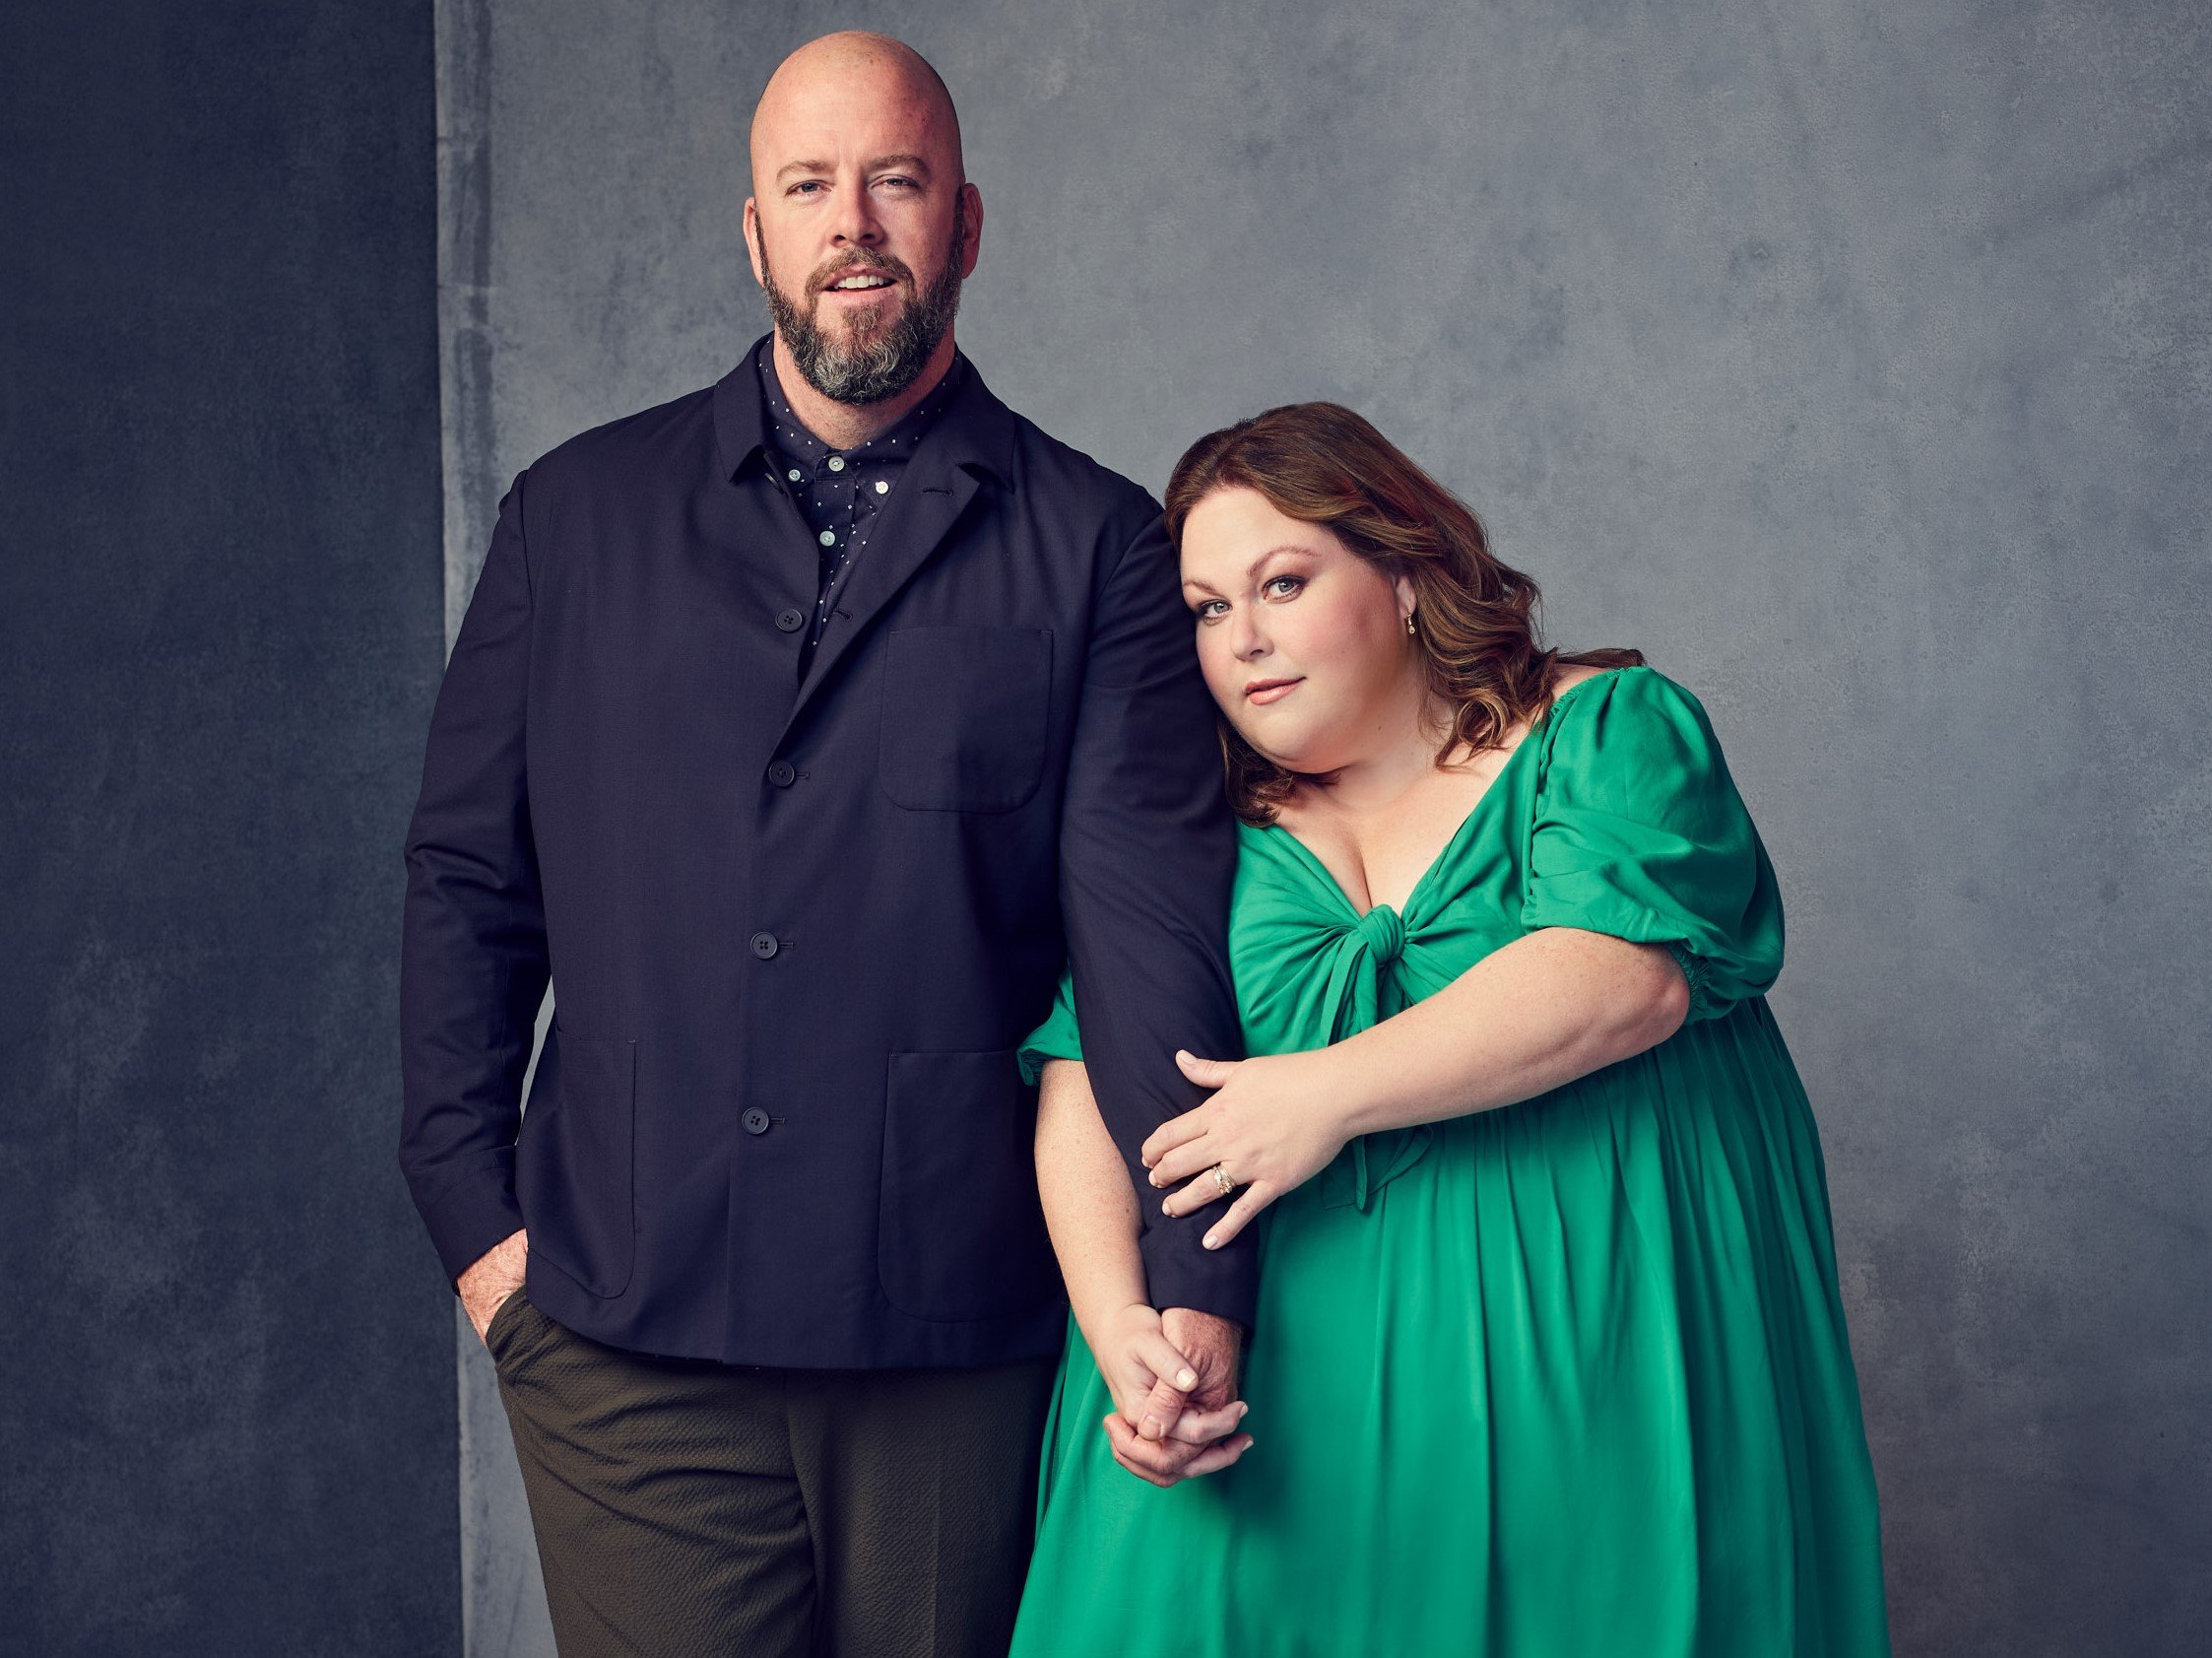 'This Is Us' Season 6 star Chris Sullivan and Chrissy Metz, in character as Toby and Kate, hold hands as they pose for promotional pictures. Sullivan wears a dark blue jacket and gray pants. Metz wears a green dress.